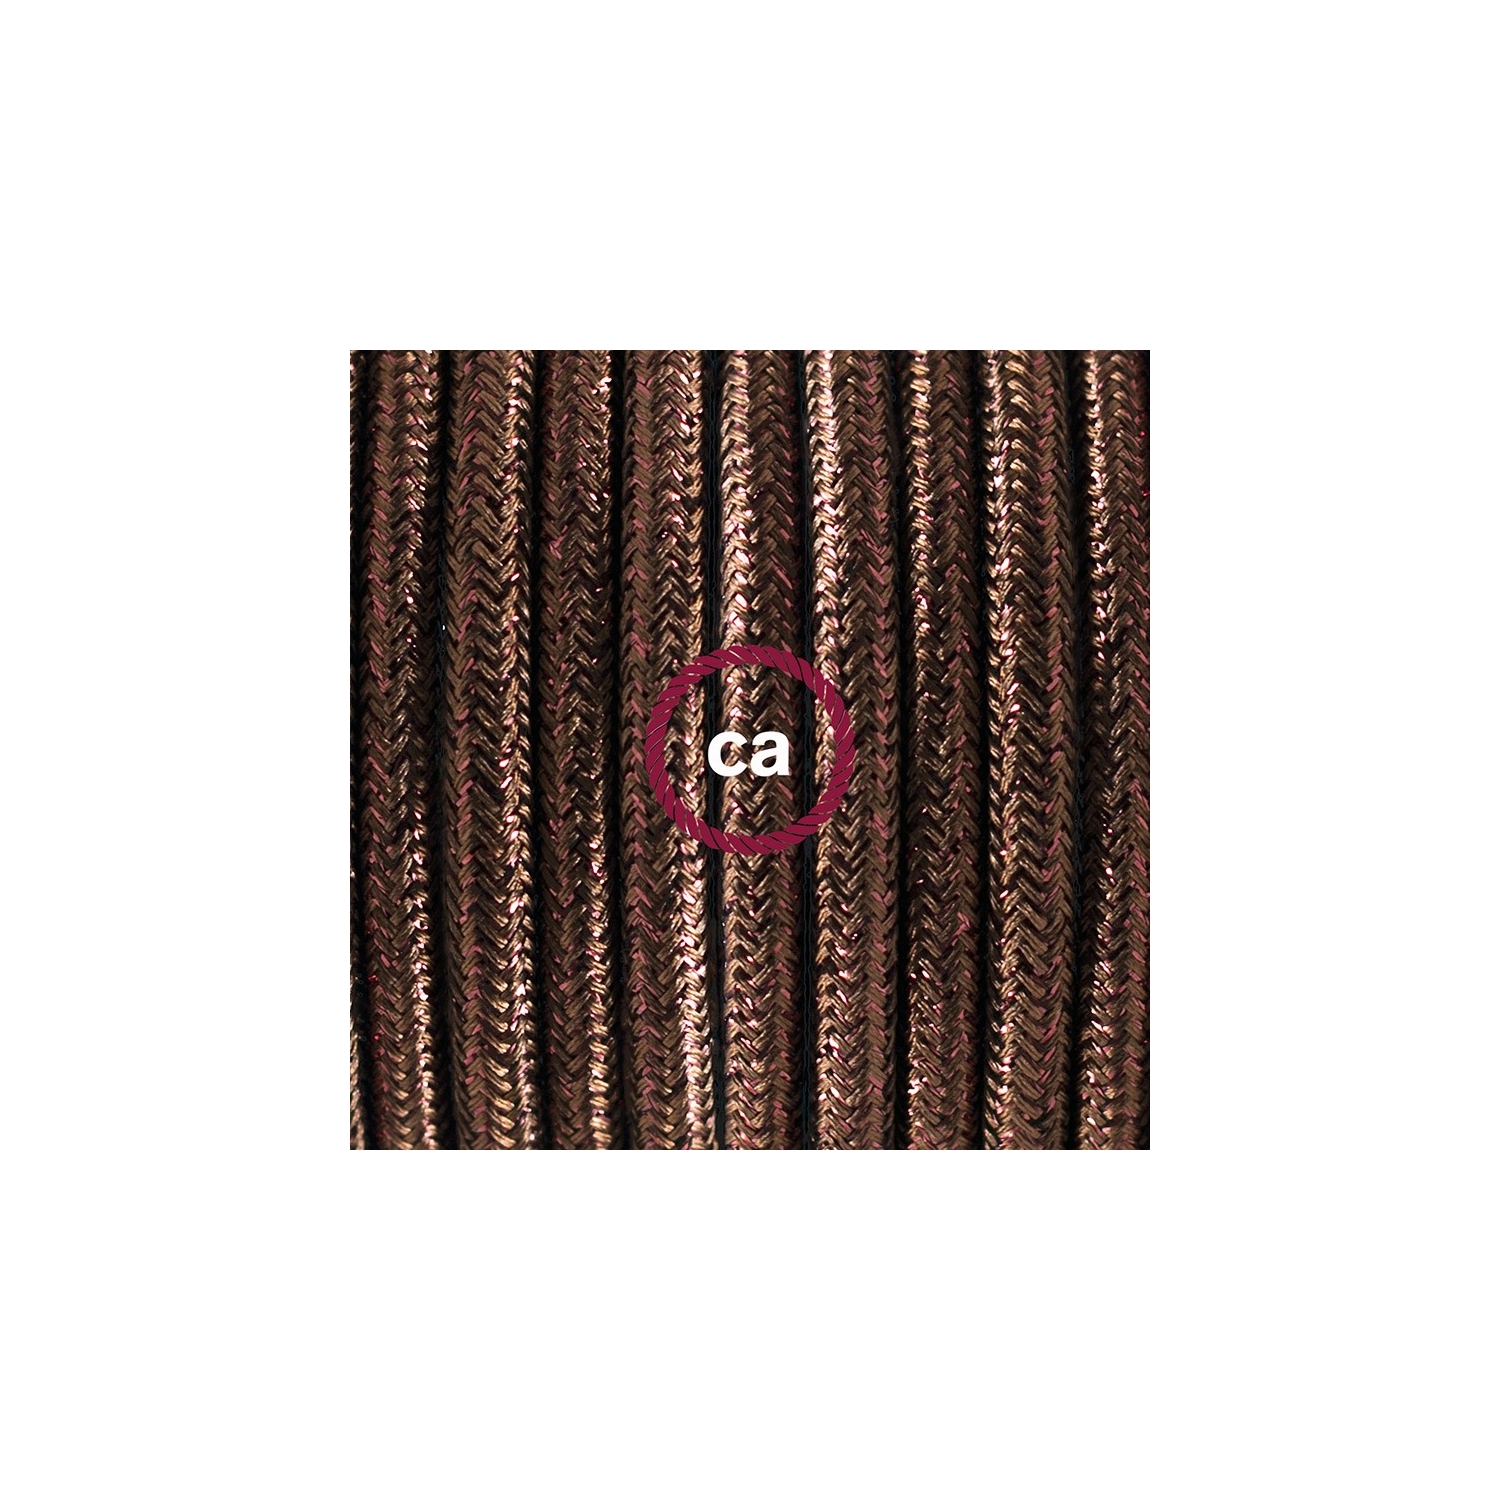 Single Pendant, suspended lamp with Glittering Brown textile cable RL13